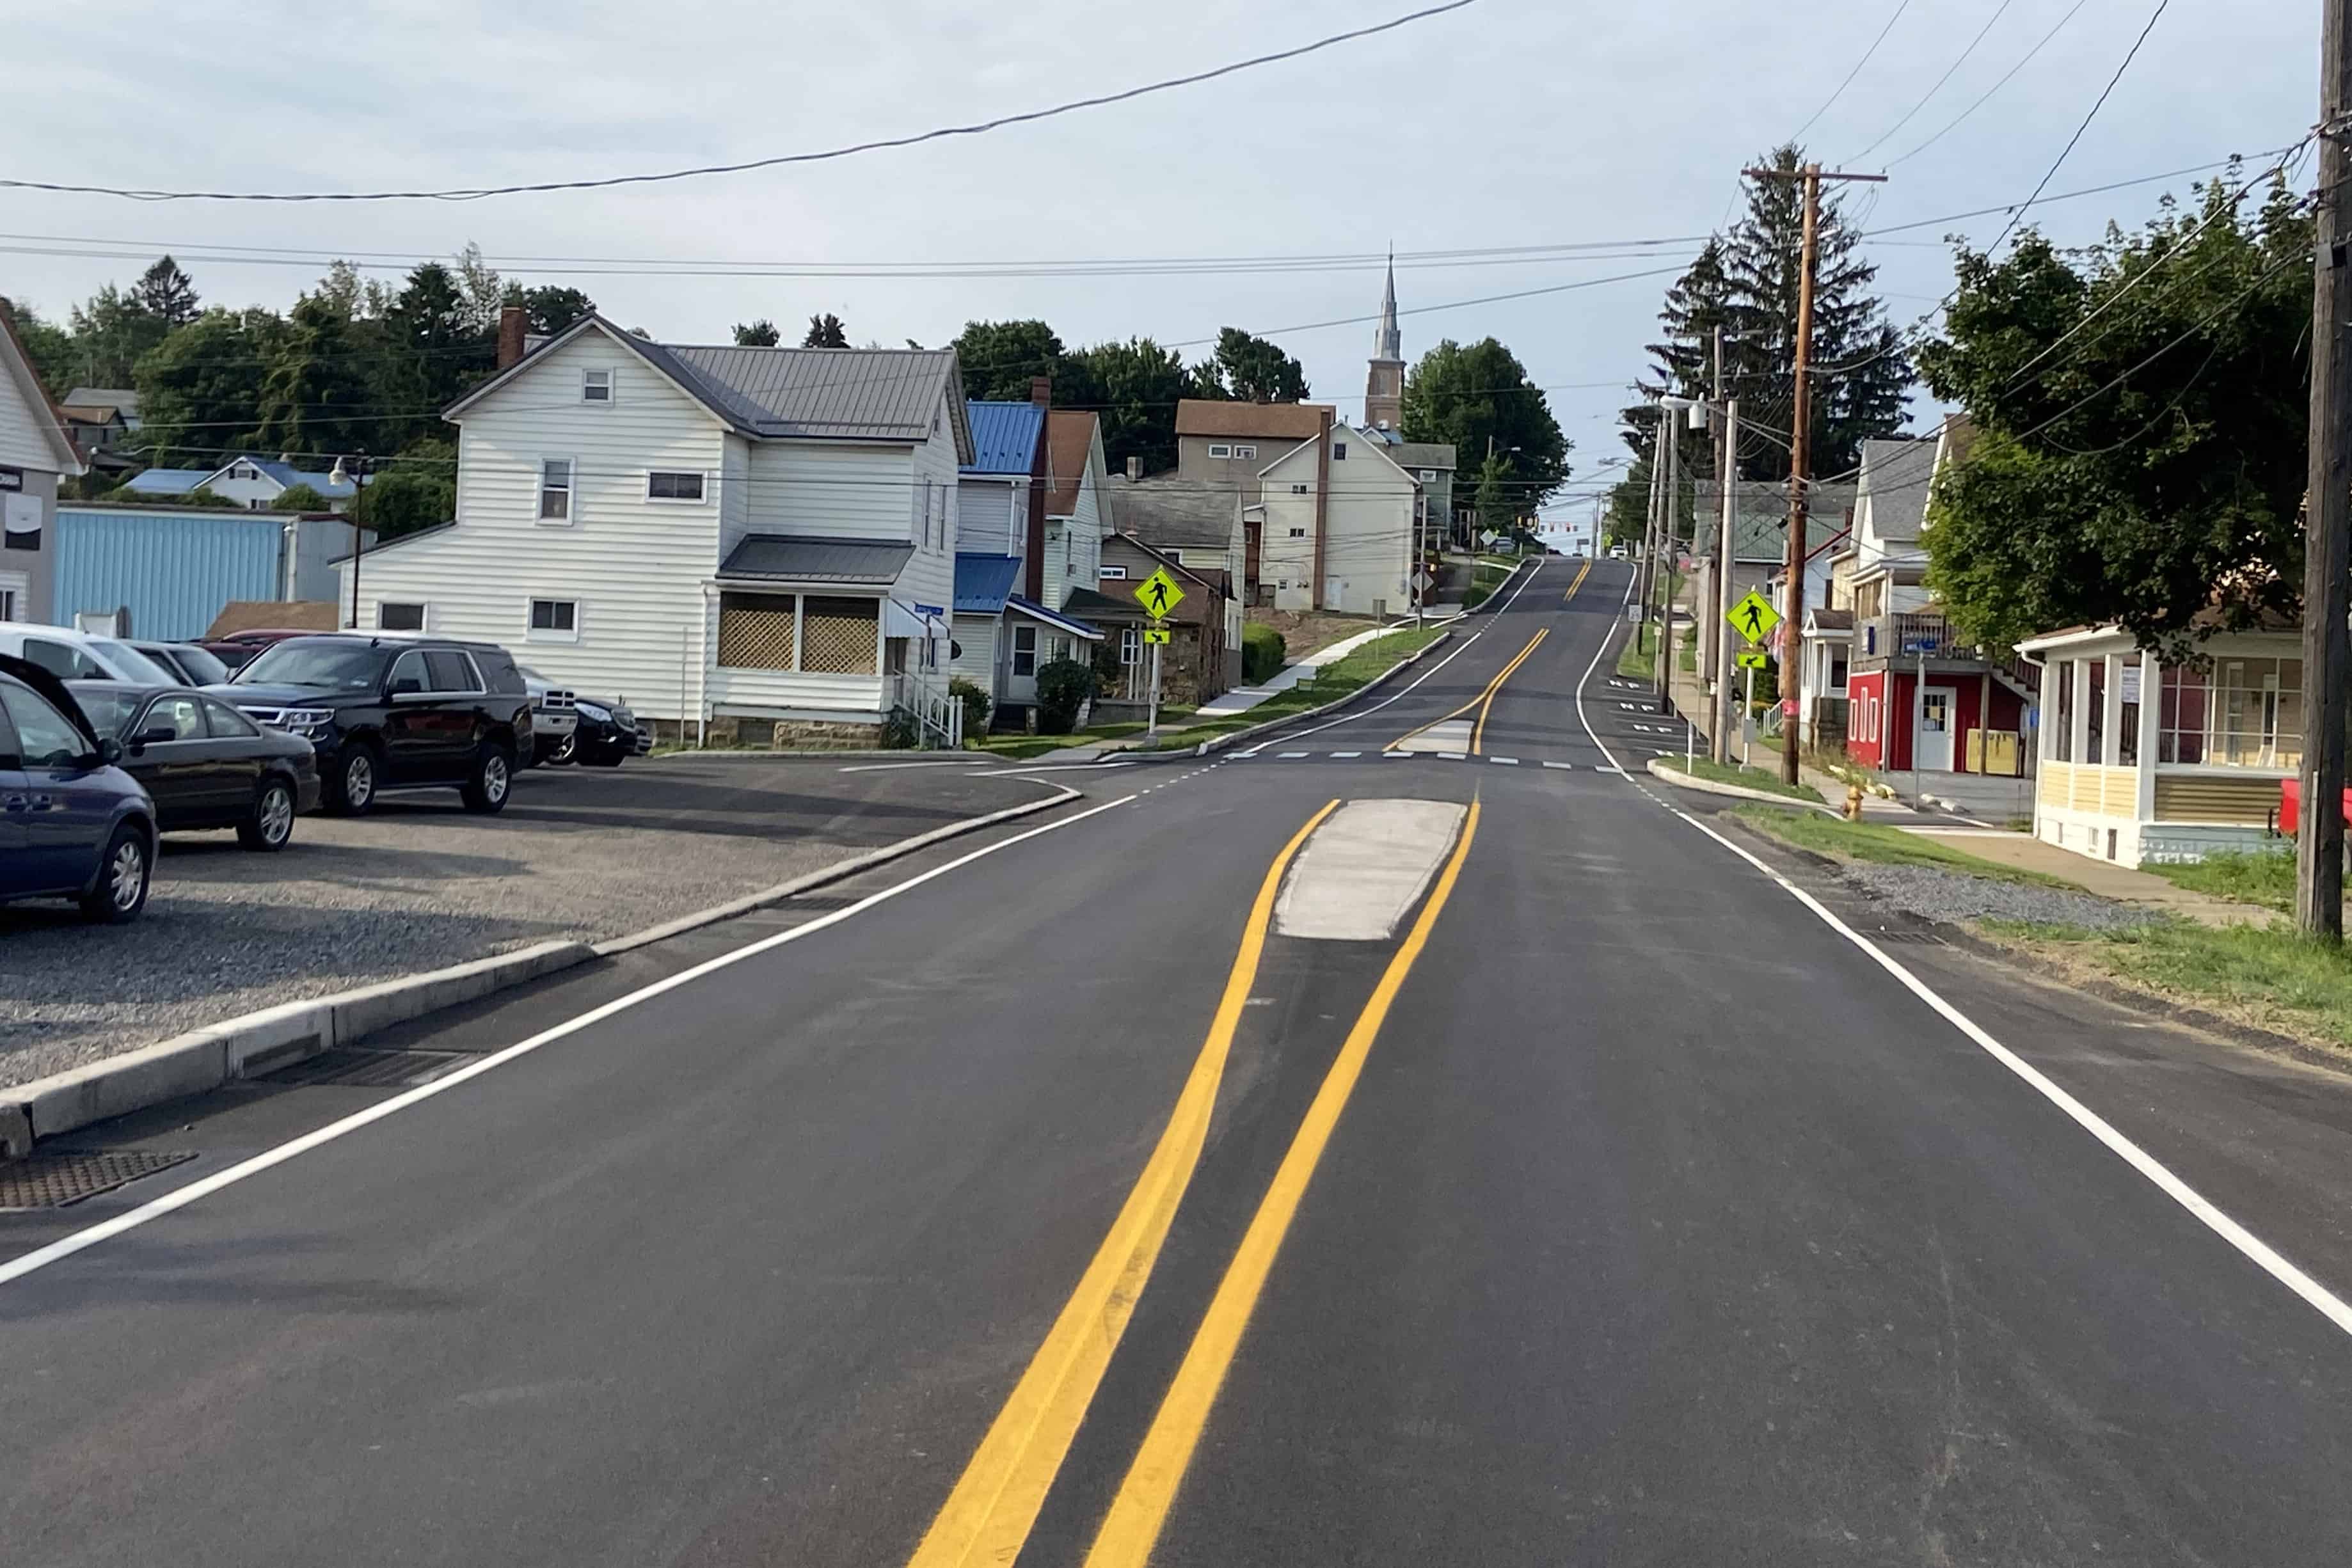 Freshly paved two-lane Route 219 runs throughs a town with buildings on either side.